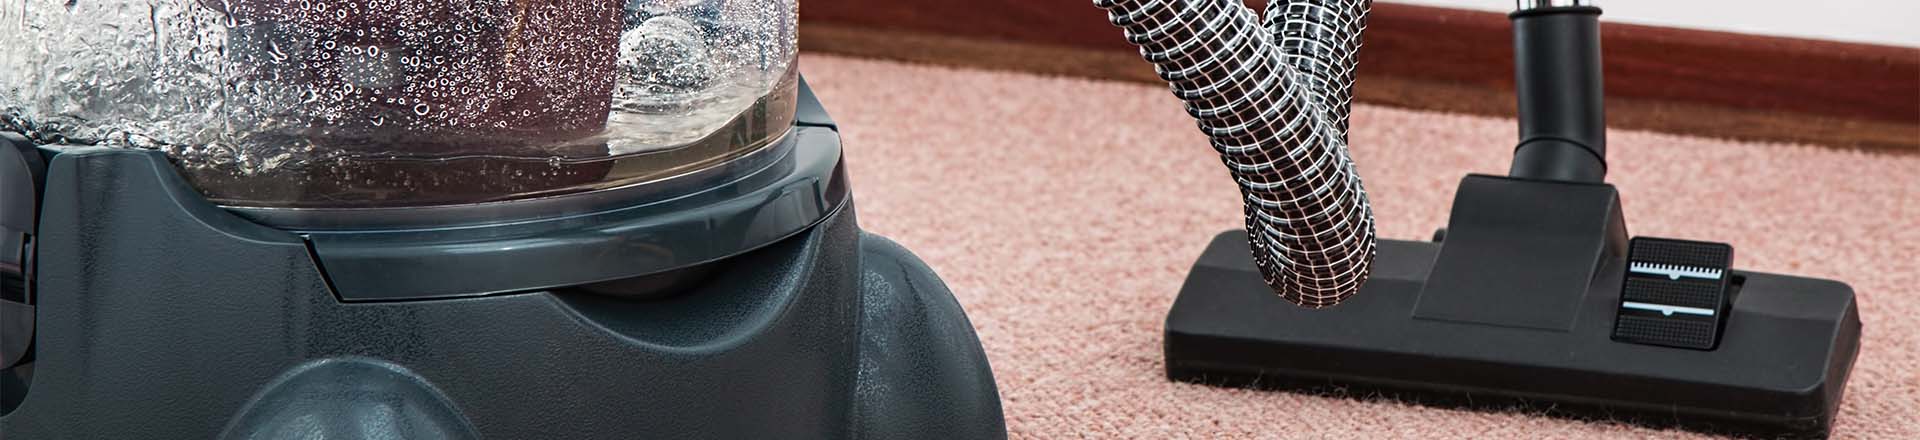 Cleaning Carpets Prolongs their Lifespan